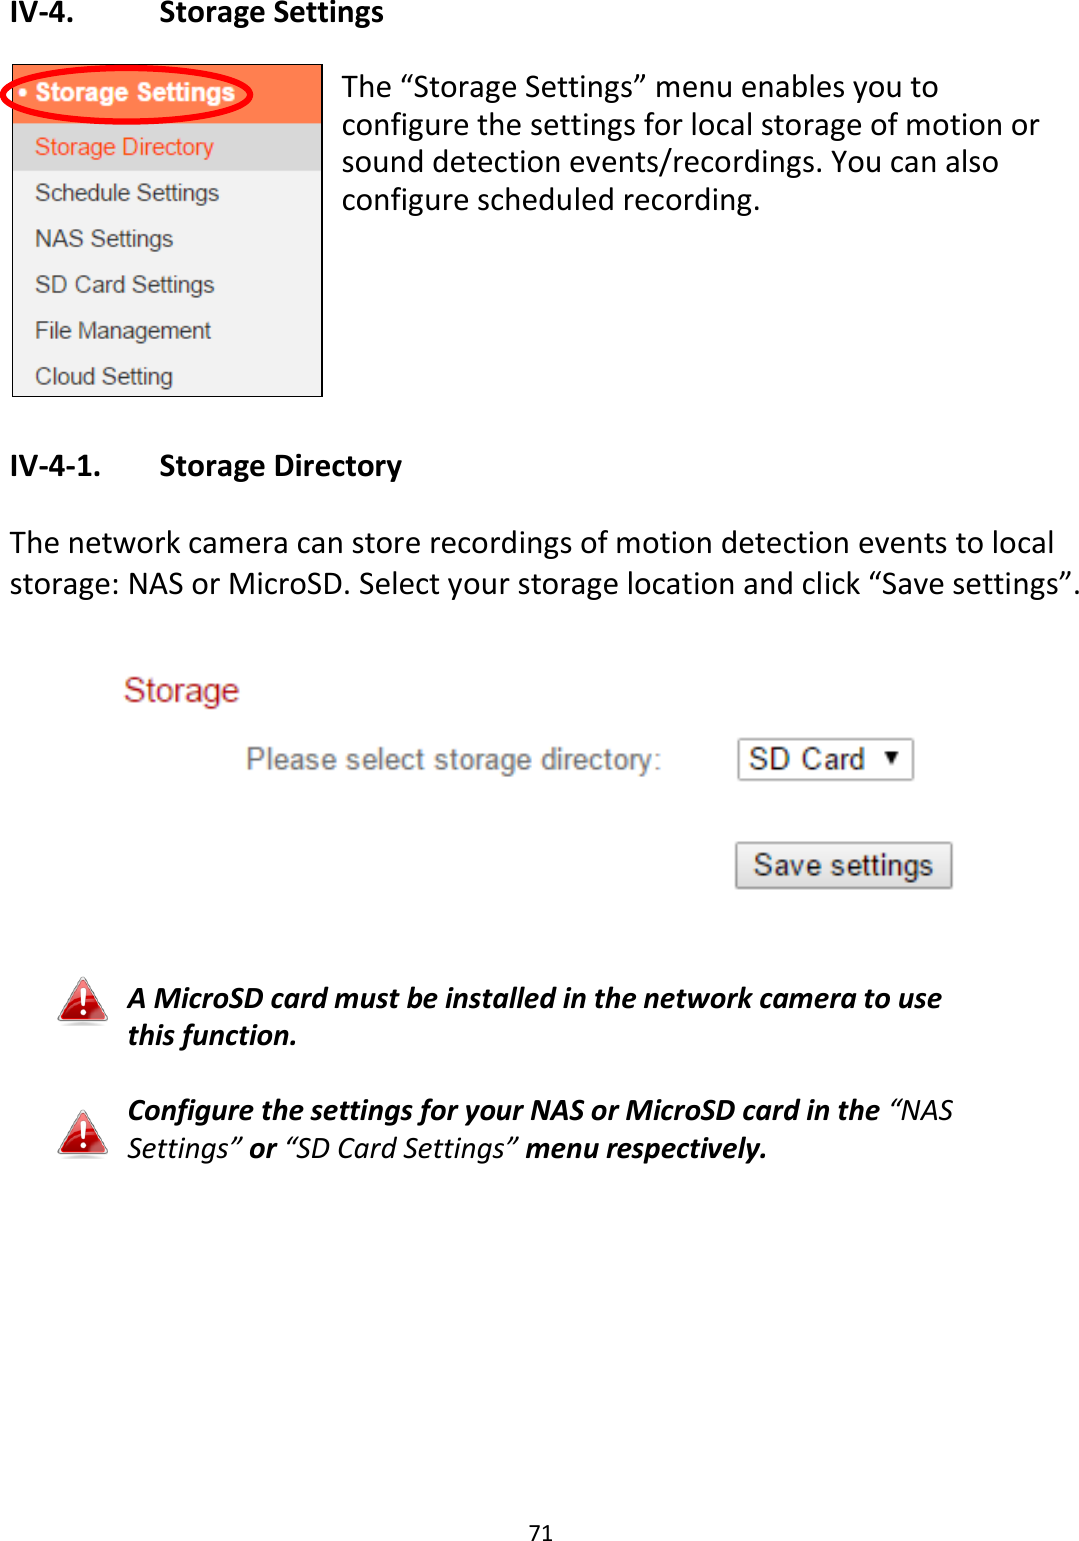 71  IV-4.    Storage Settings  The “Storage Settings” menu enables you to configure the settings for local storage of motion or sound detection events/recordings. You can also configure scheduled recording.      IV-4-1.   Storage Directory  The network camera can store recordings of motion detection events to local storage: NAS or MicroSD. Select your storage location and click “Save settings”.    A MicroSD card must be installed in the network camera to use this function.  Configure the settings for your NAS or MicroSD card in the “NAS Settings” or “SD Card Settings” menu respectively.   